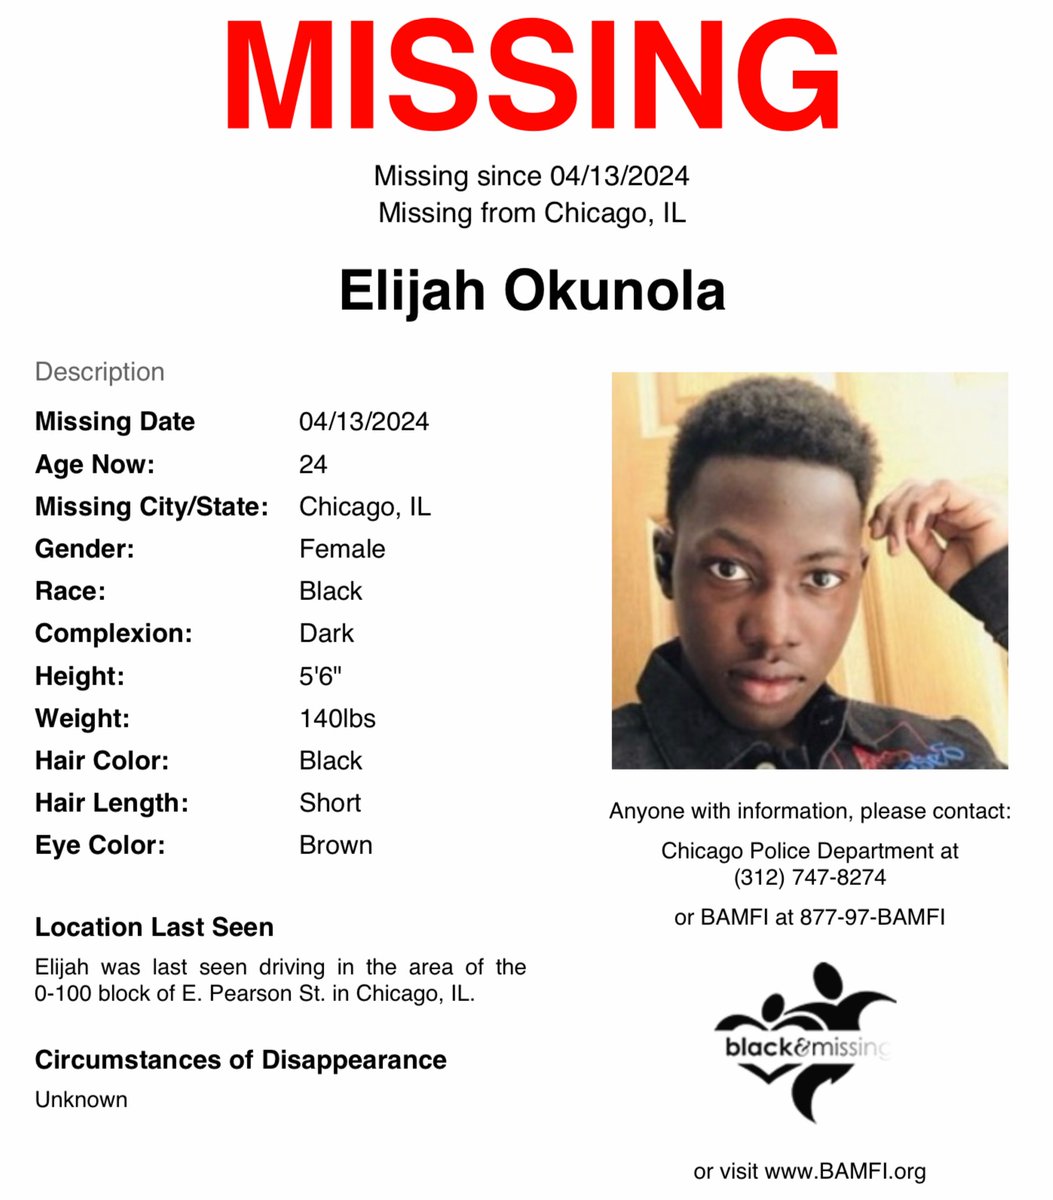 #Chicago, #Illinois: 24y/o Elijah Okunola #missing since April 13. Elijah is a delivery driver frequently seen in the Hyde Park & Downtown/Loop areas. He was last known to have been driving in the area of the 0-100 block of E. Pearson St. Have you seen Elijah? #ElijahOkunola